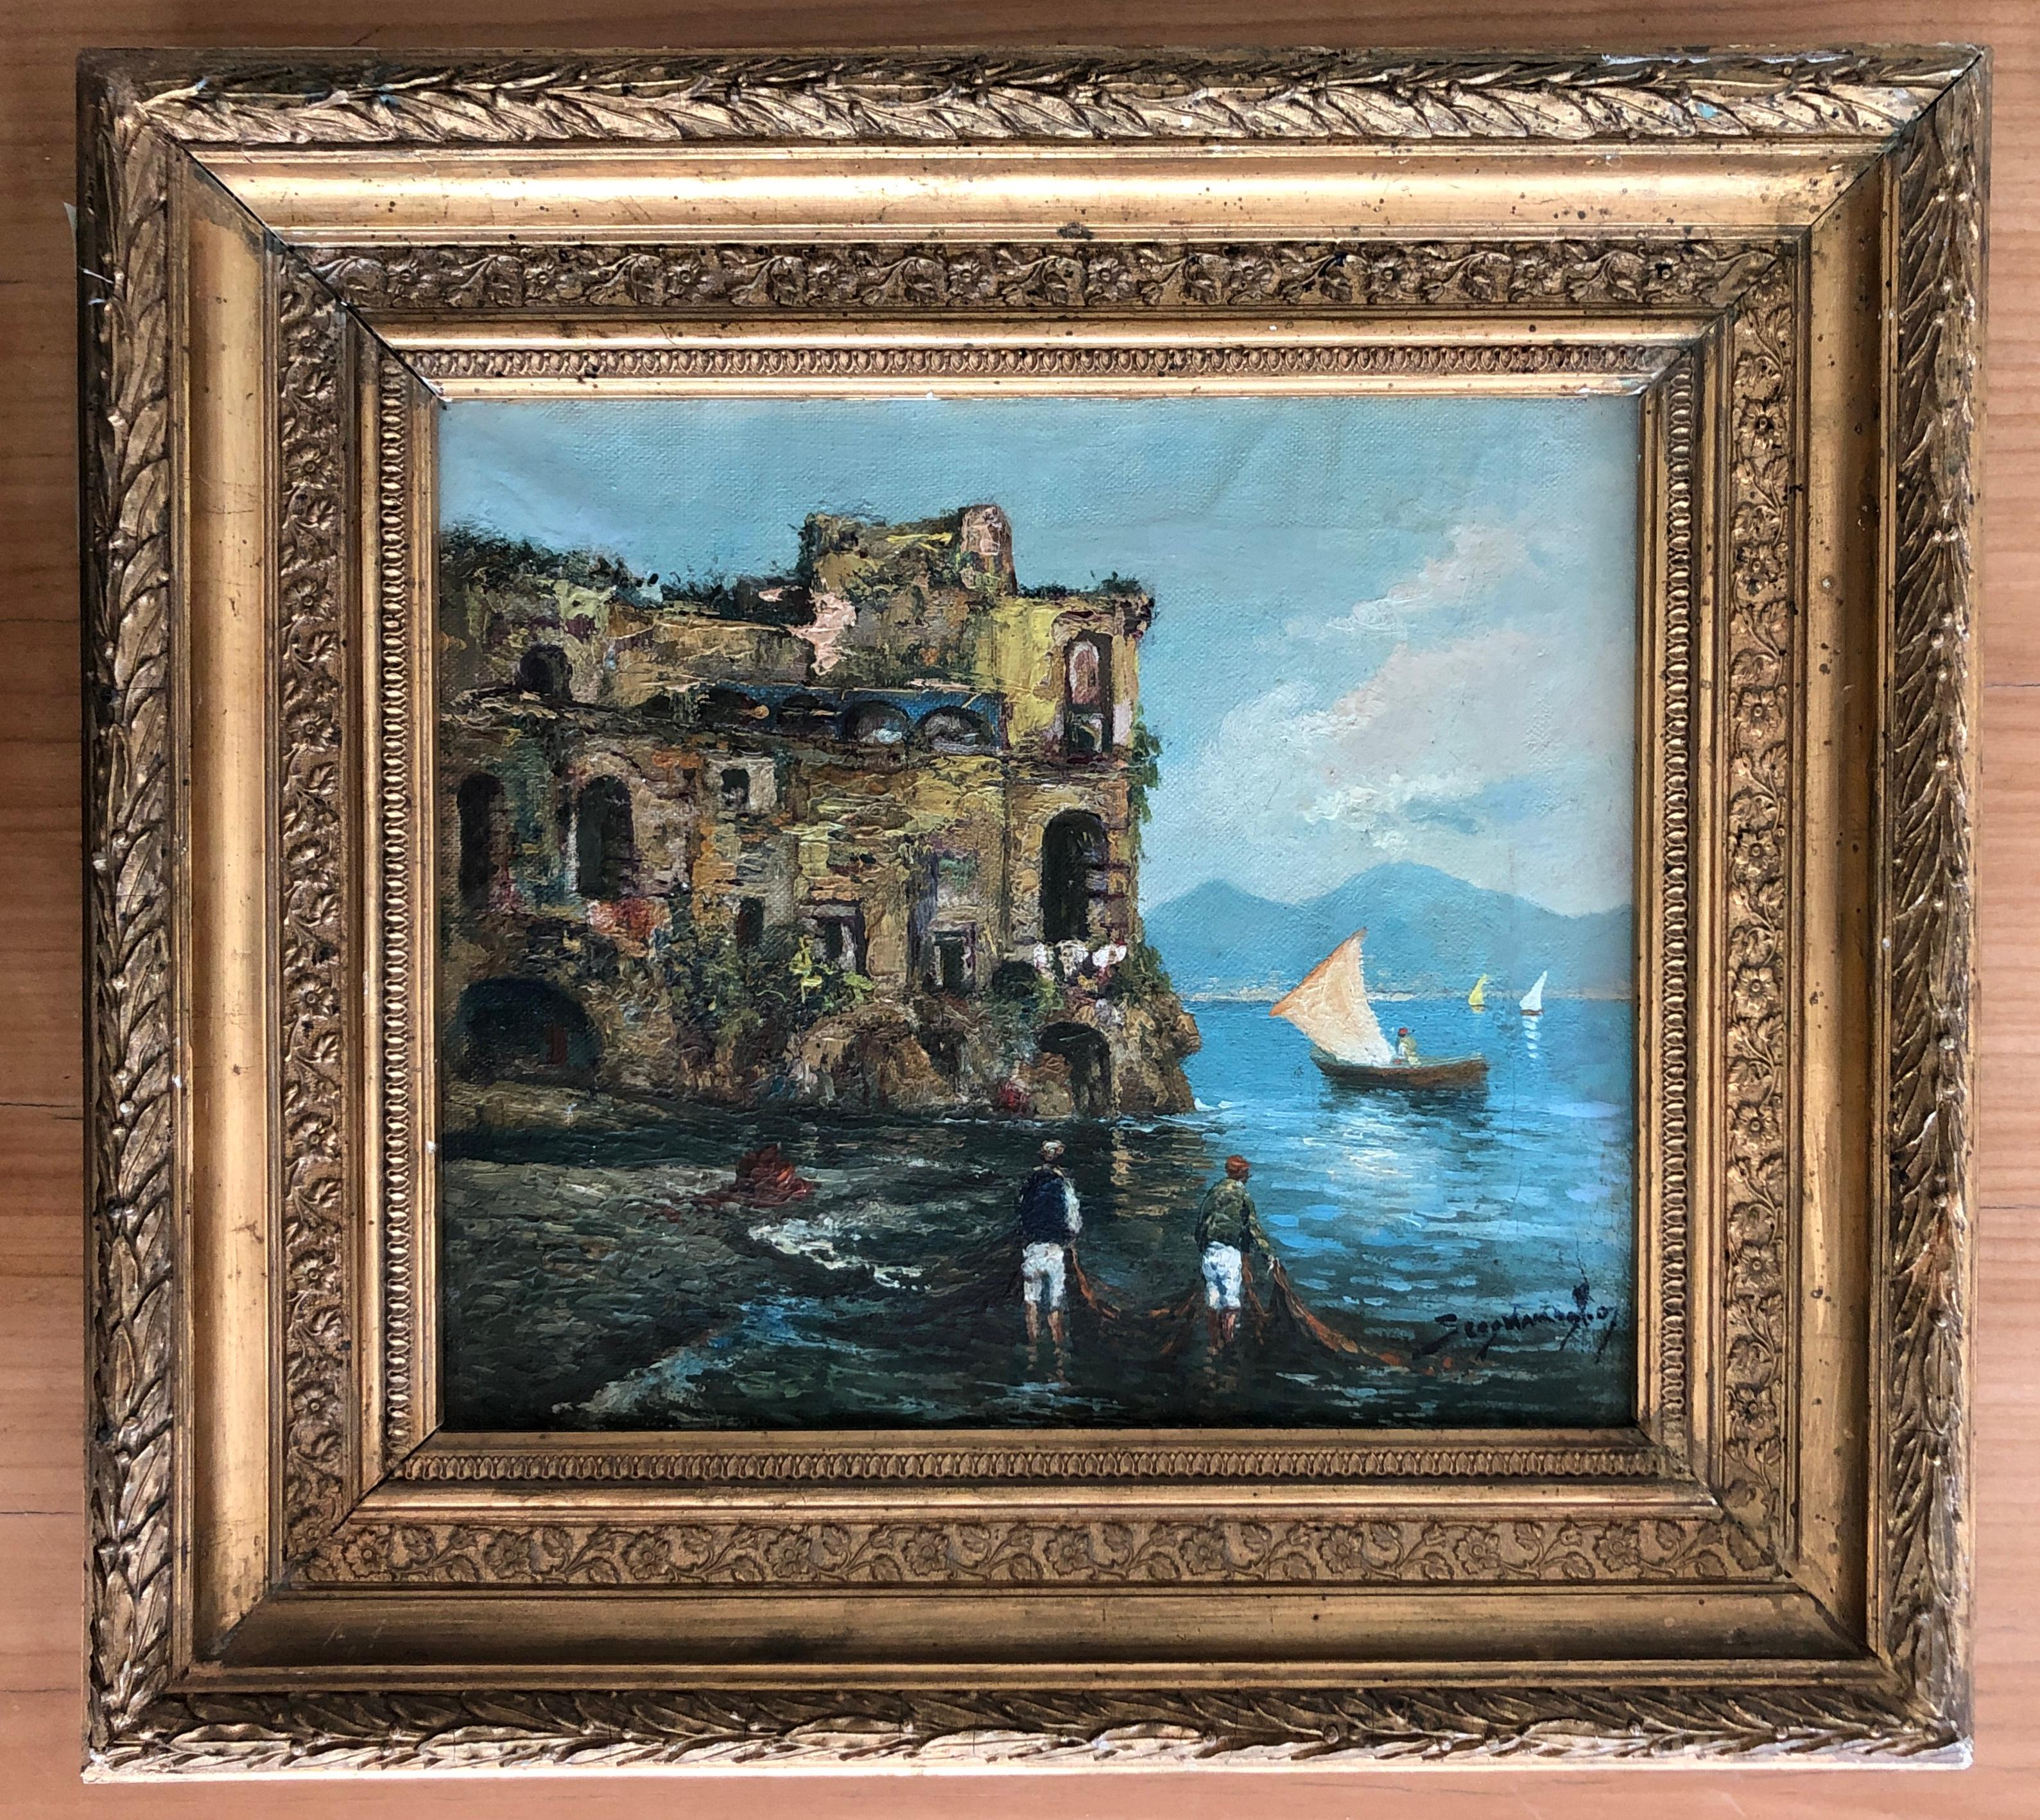 Bay of Naples and fishermen - Painting by Roberto Scognamiglio